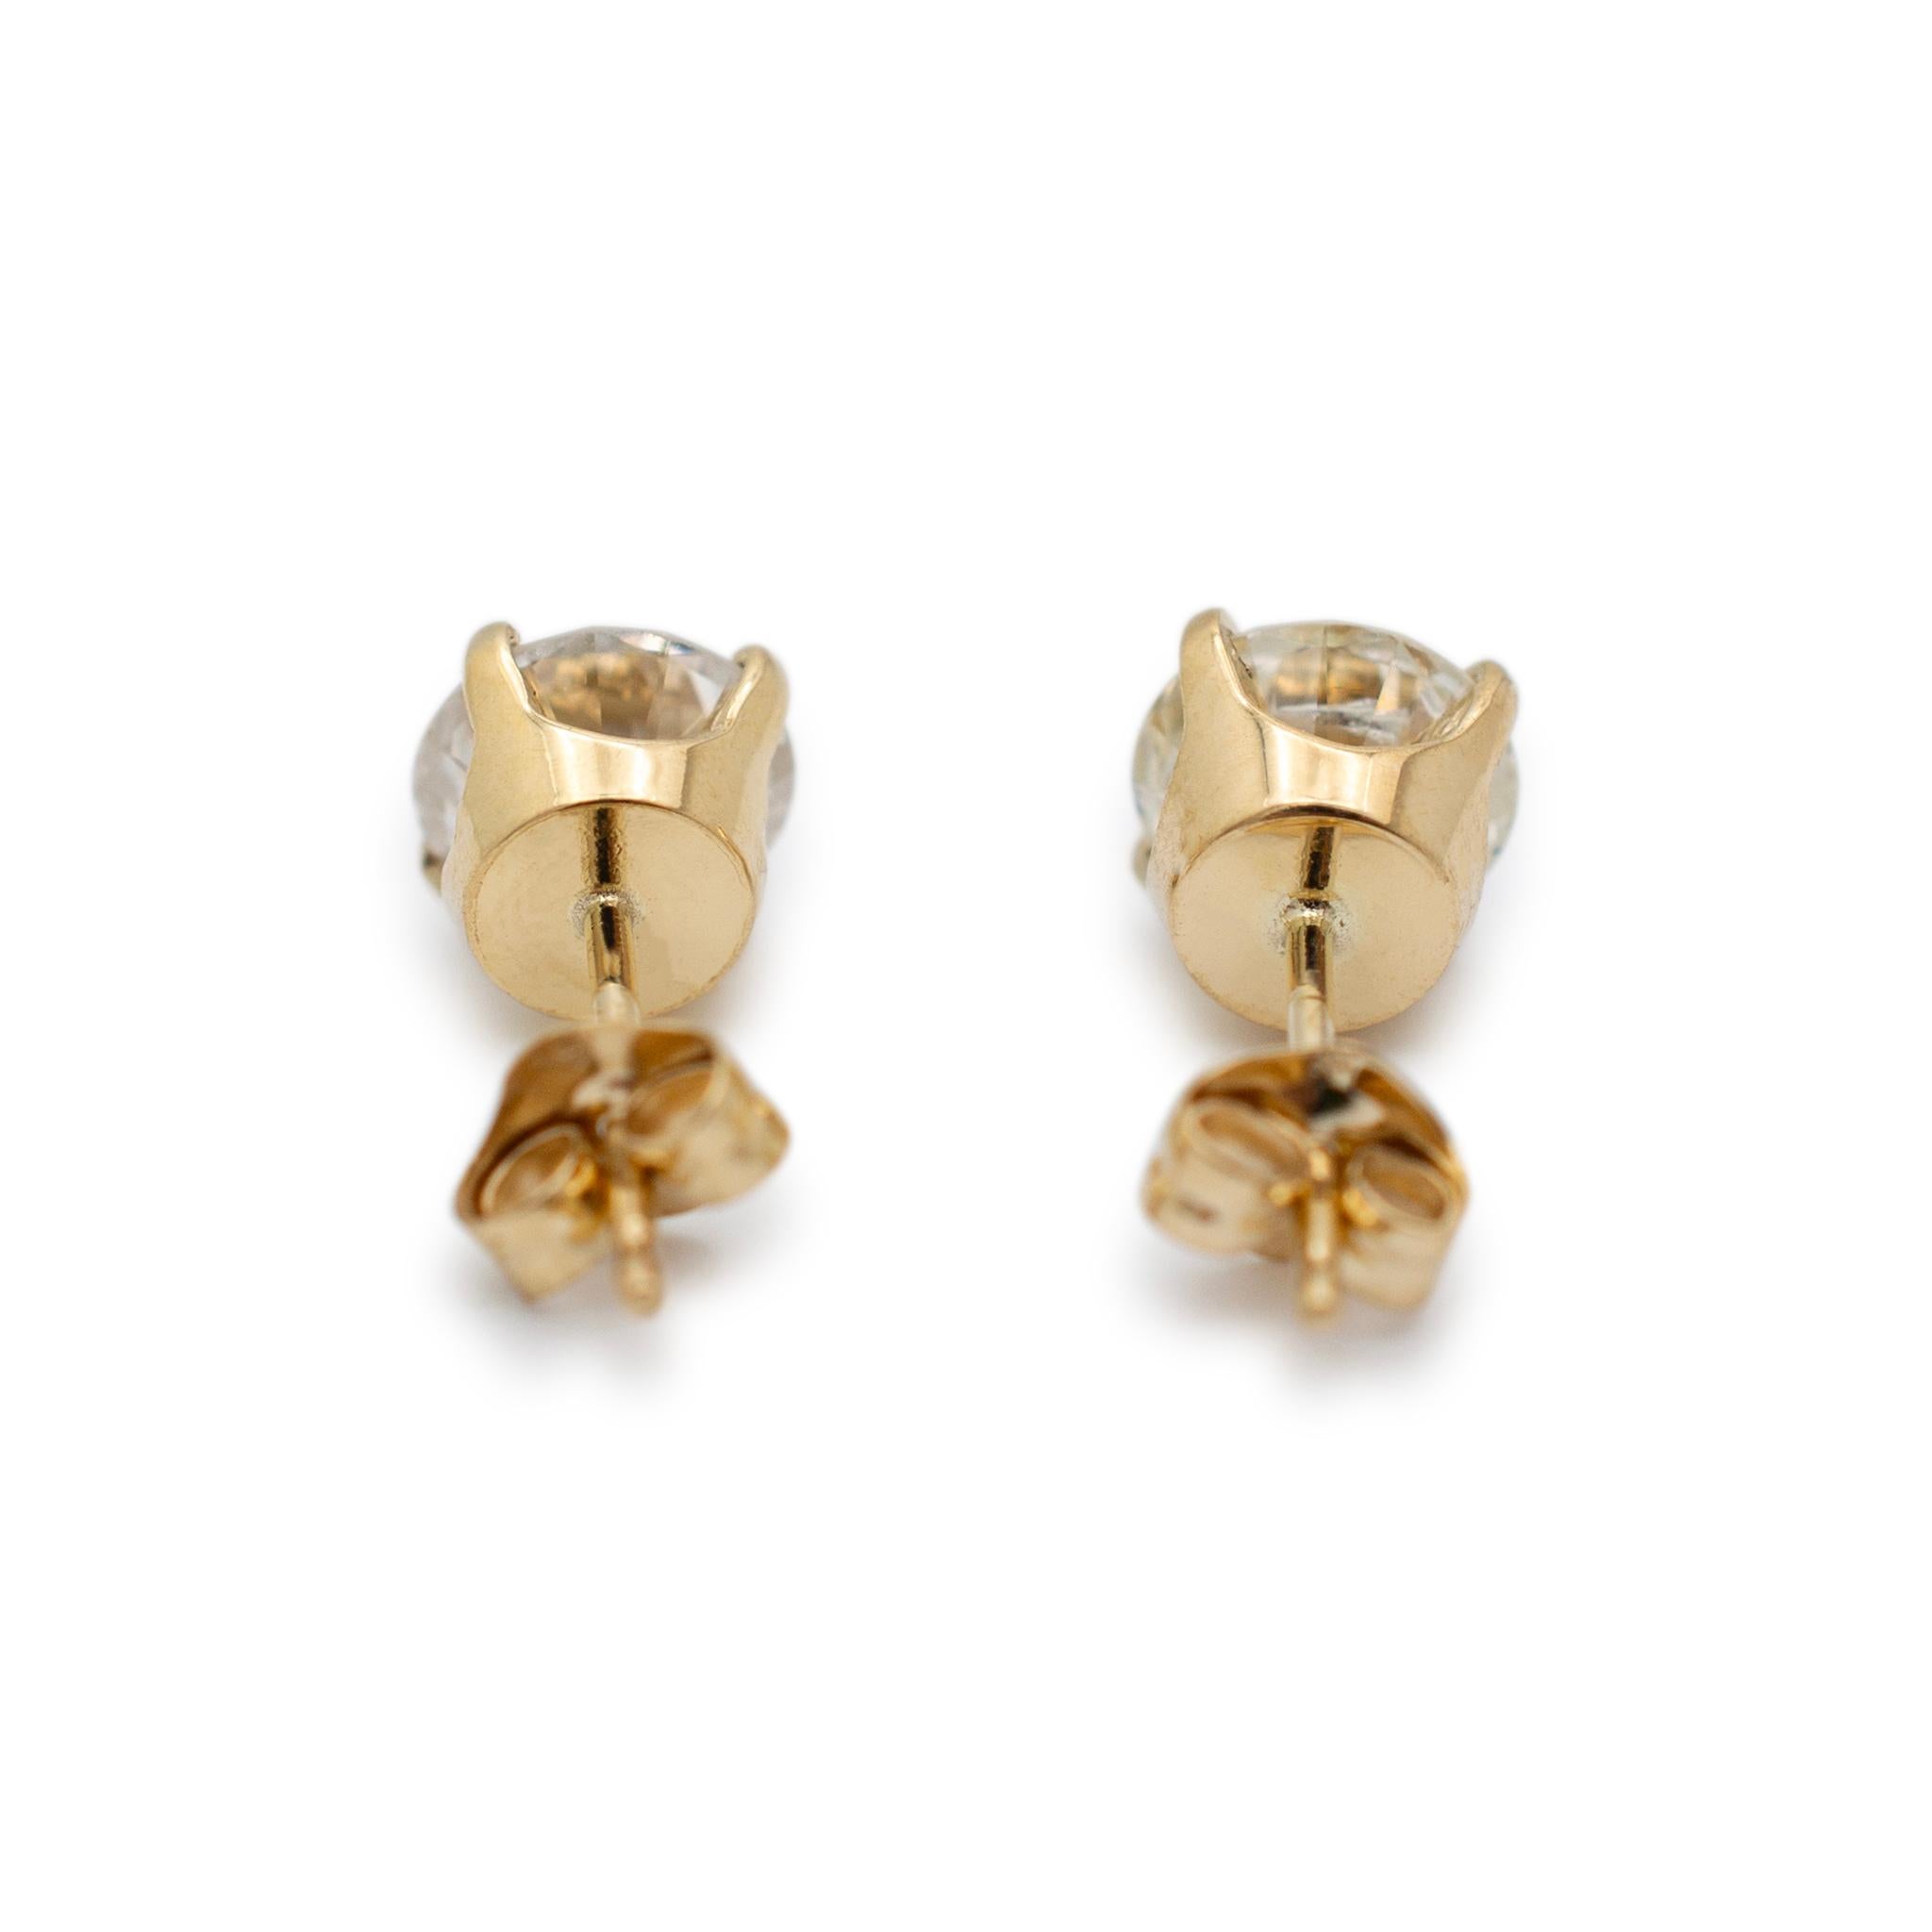 Gender: Ladies

Metal Type: 14K Yellow Gold

Length: 0.50 Inches

Diameter: 6.25 mm

Weight: 1.34 grams

Ladies 14K yellow gold diamond stud earrings with push backs. The metal was tested and determined to be 14K yellow gold. Engraved with